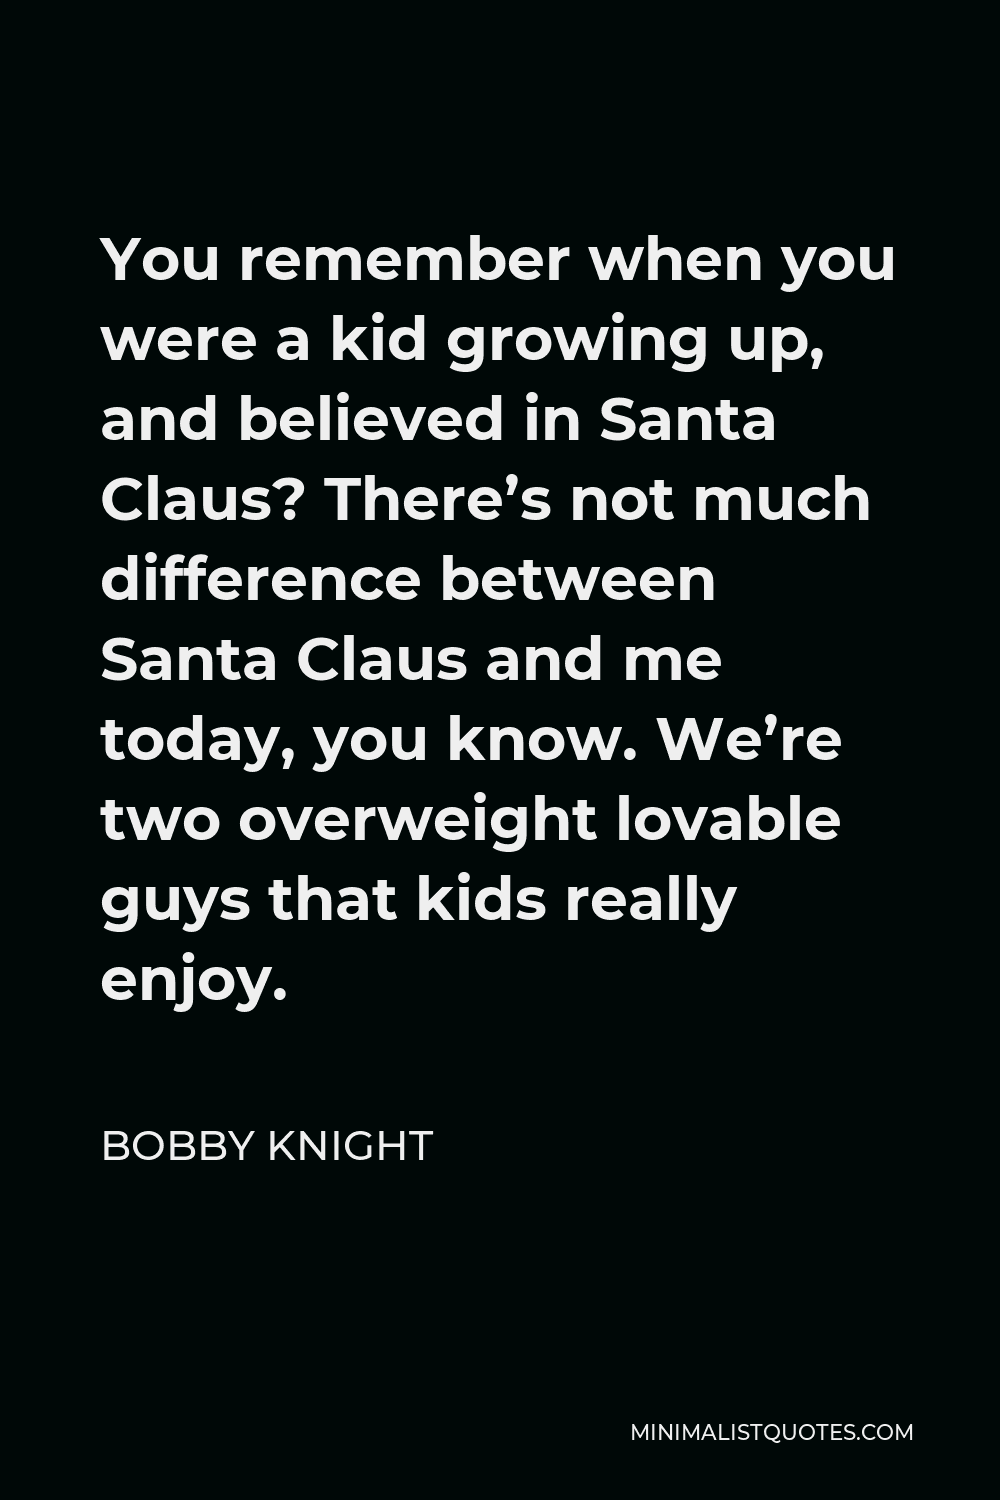 Bobby Knight Quote - You remember when you were a kid growing up, and believed in Santa Claus? There’s not much difference between Santa Claus and me today, you know. We’re two overweight lovable guys that kids really enjoy.